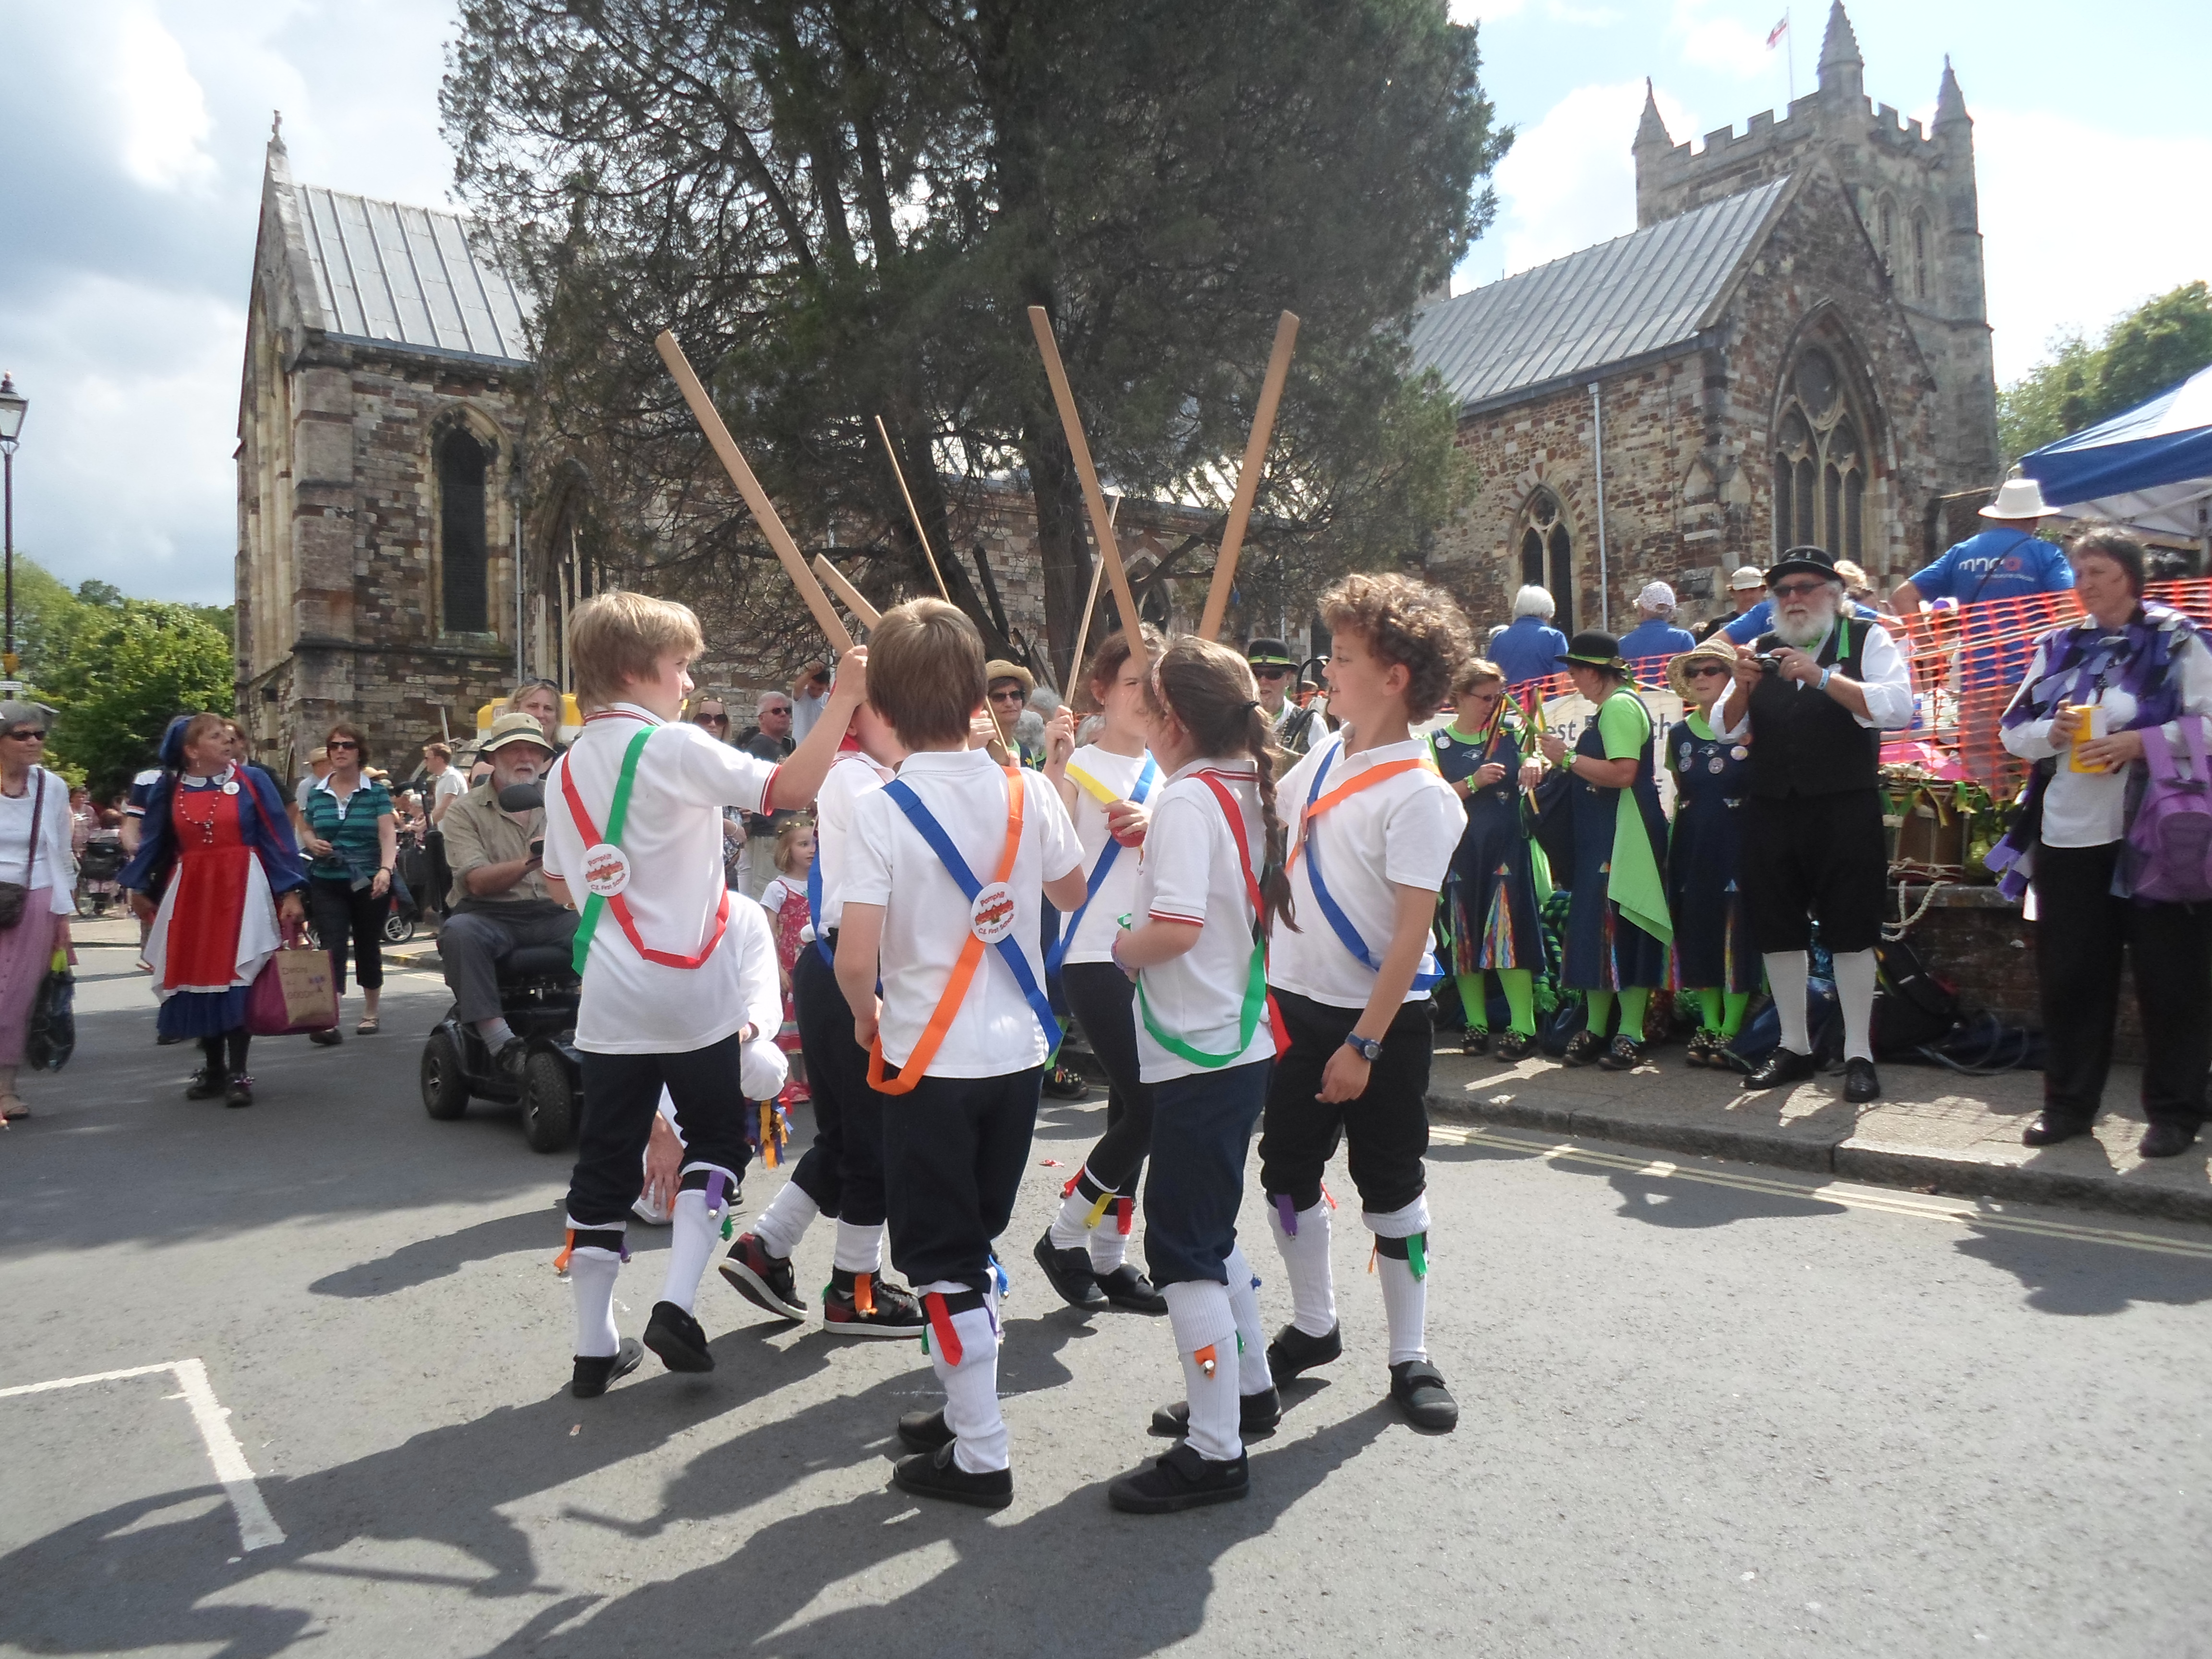 Six children wearing white tops, black trousers and long white socks with ribbons and bells are dancing a longsword dance in a circle, their sticks raised in the air ready to strike in the centre.